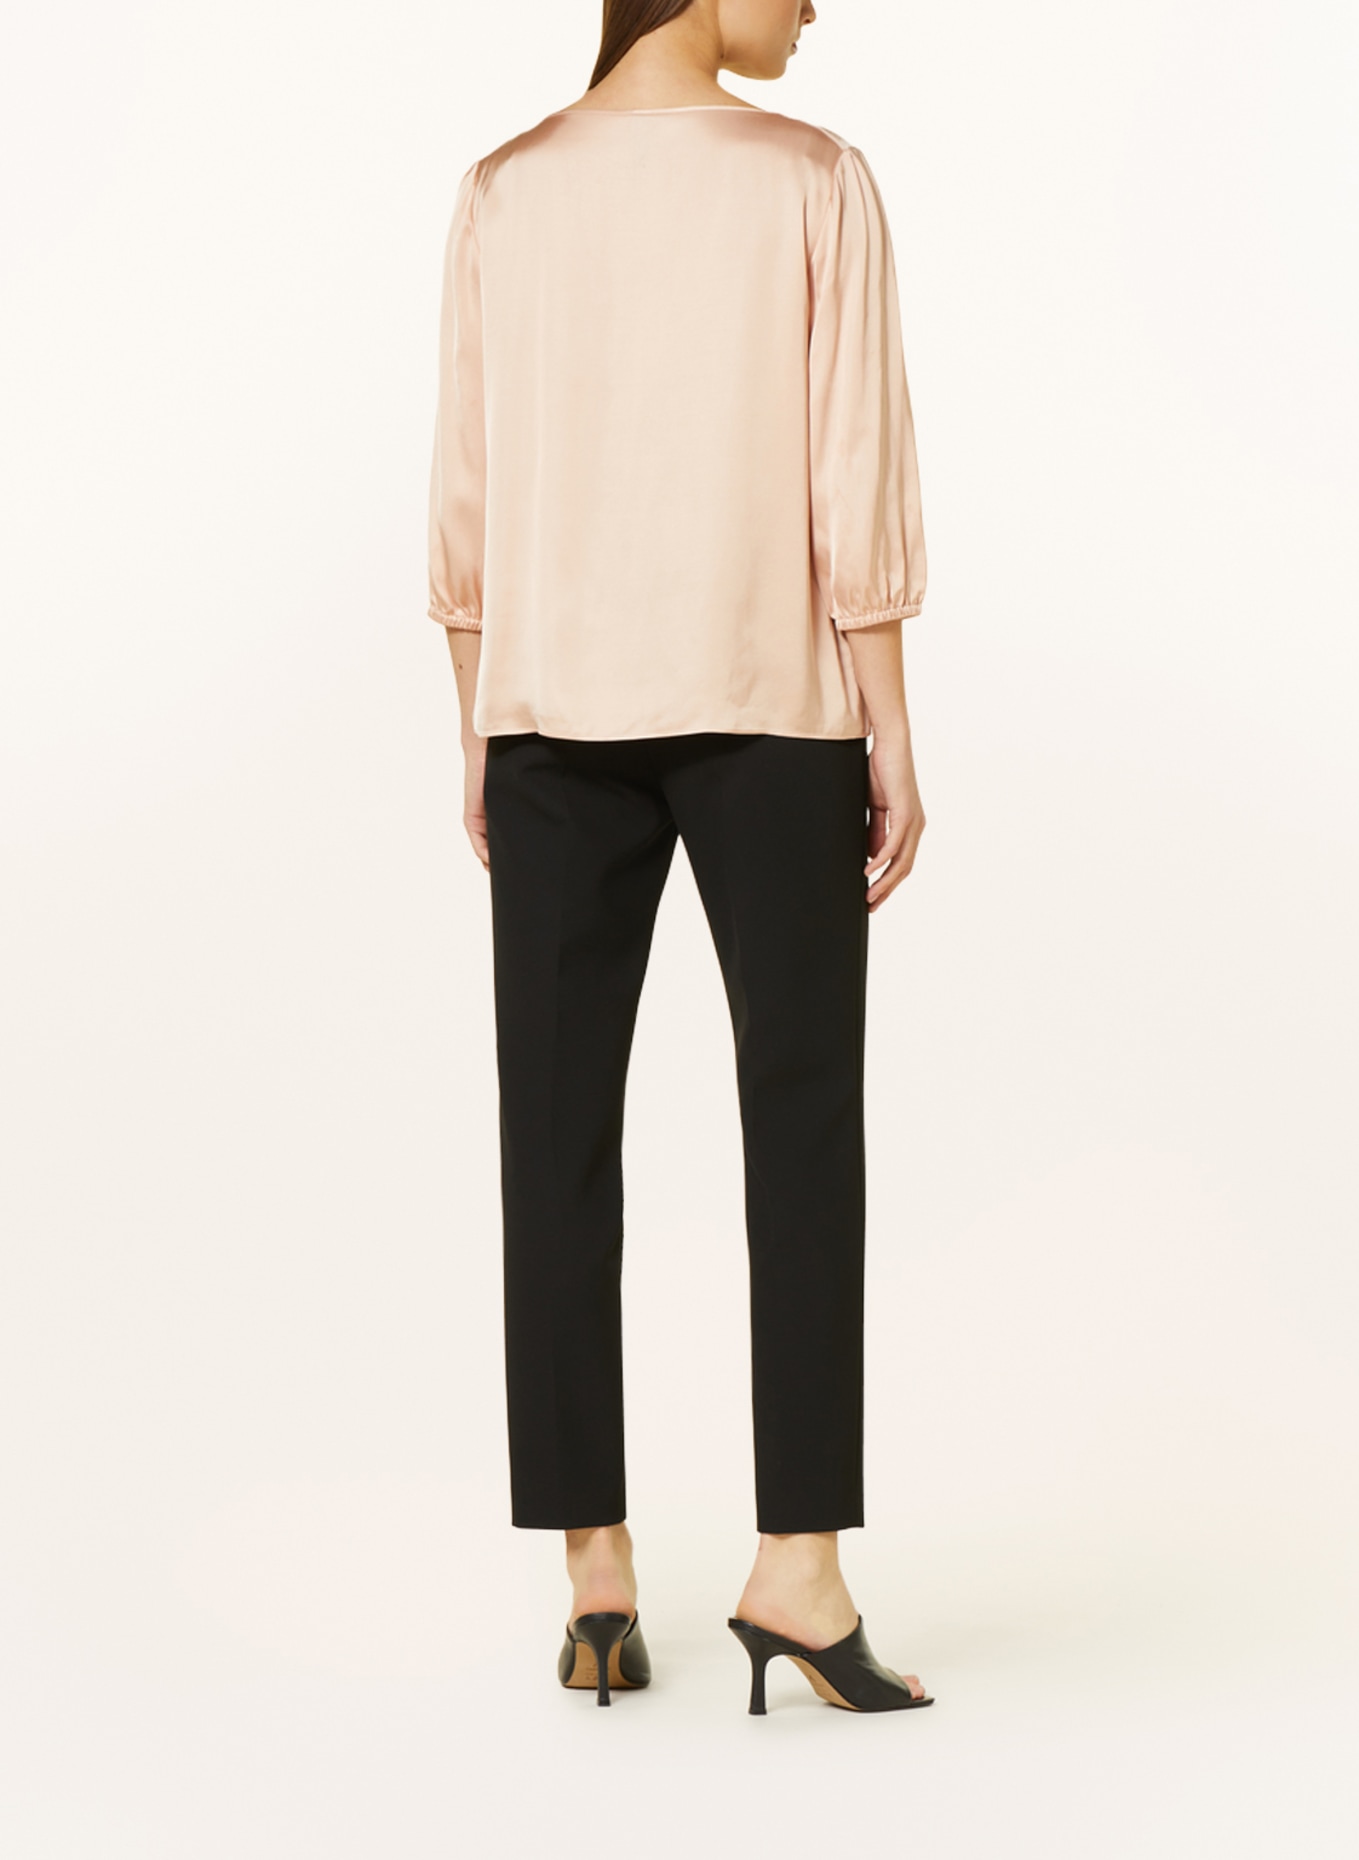 MARC CAIN Shirt blouse made of satin with 3/4 sleeves, Color: 209 sandy beige (Image 3)